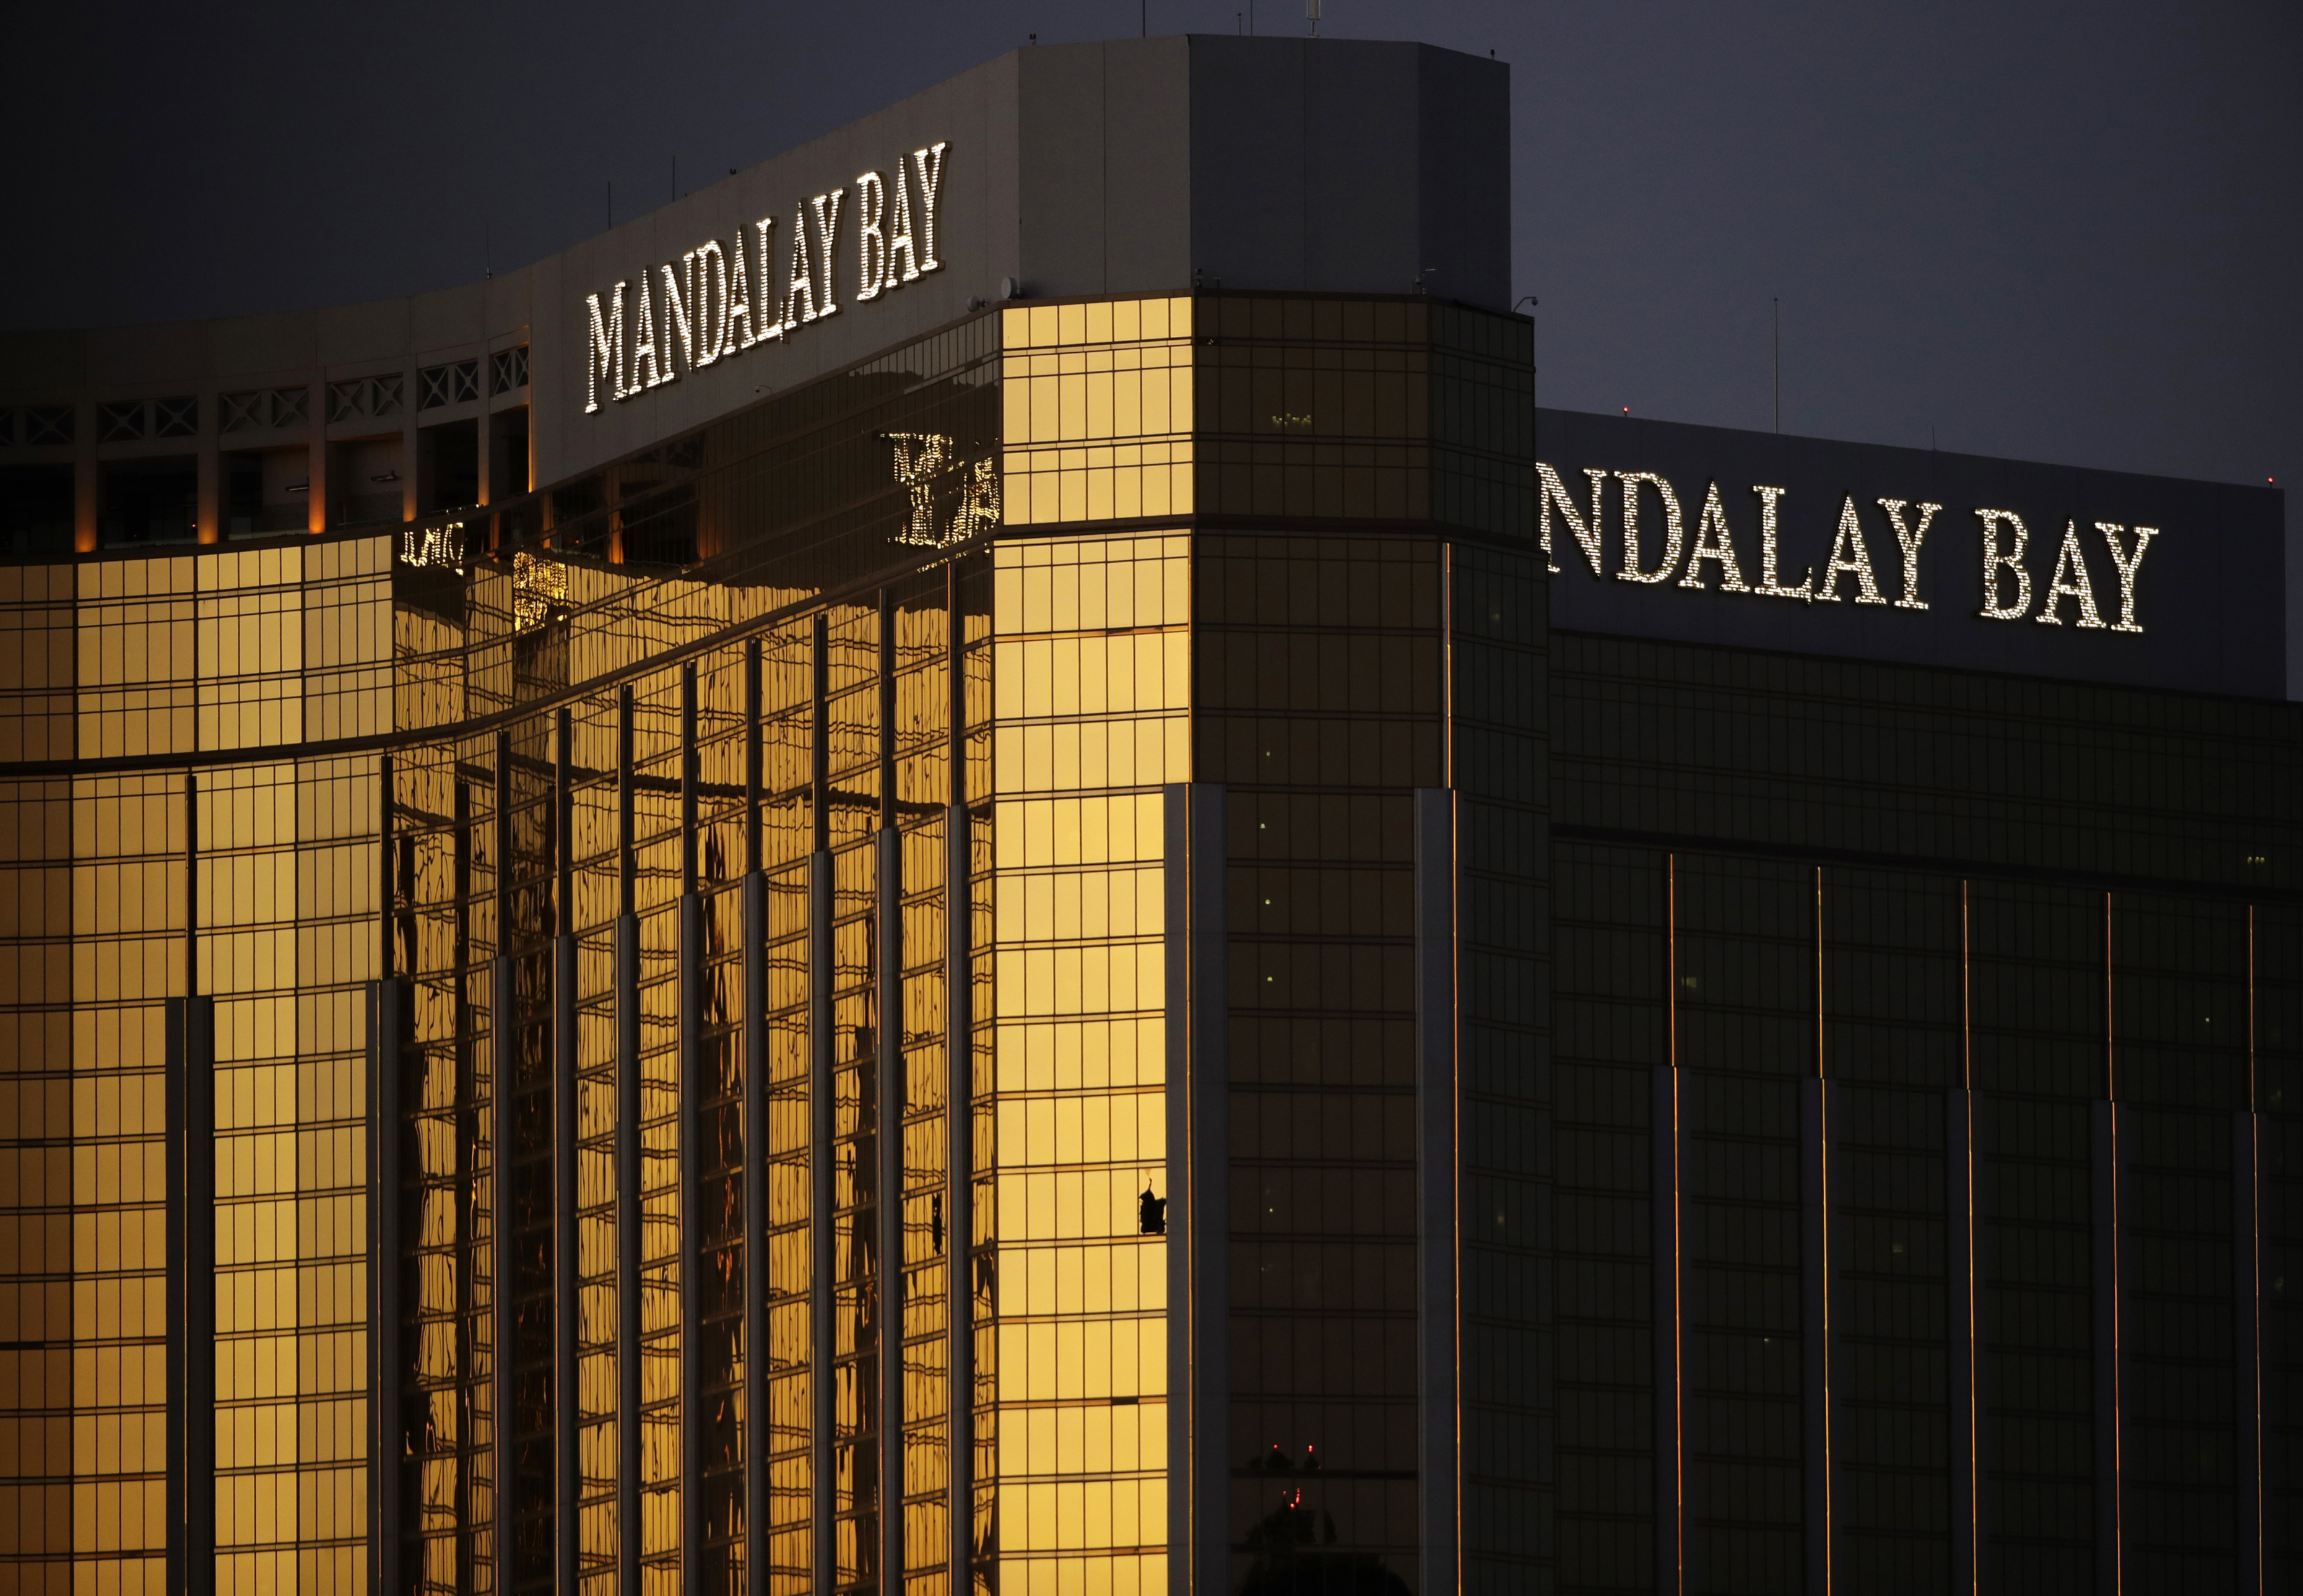 Mandalay Bay crowds appear low after Las Vegas shooting